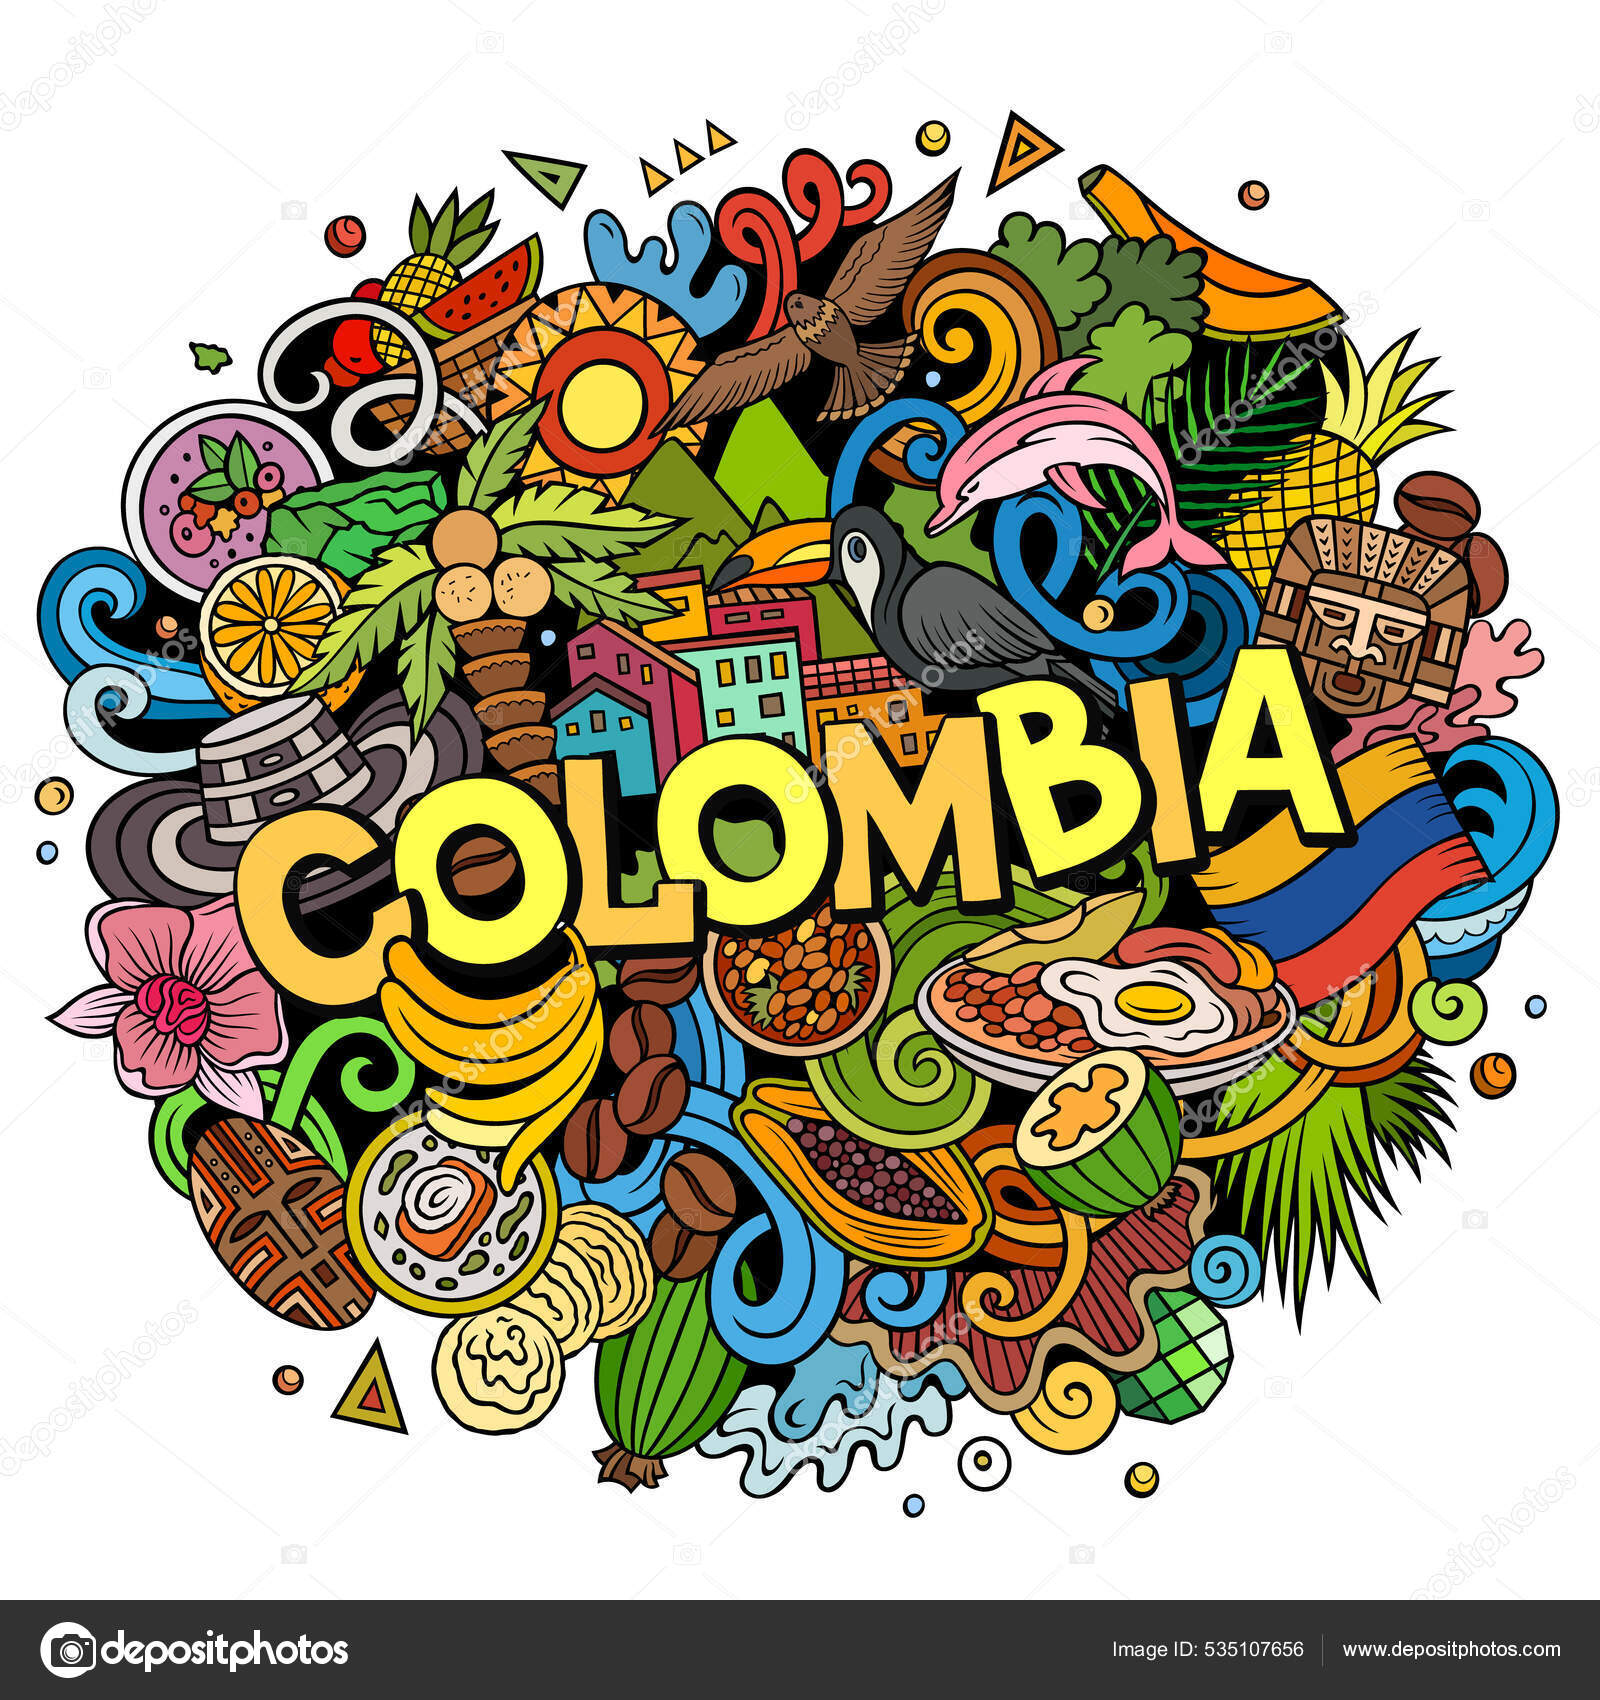 Colombia Hand Drawn Cartoon Doodle Illustration Funny Colombian Design  Creative Stock Photo by ©3dsparrow 535107656